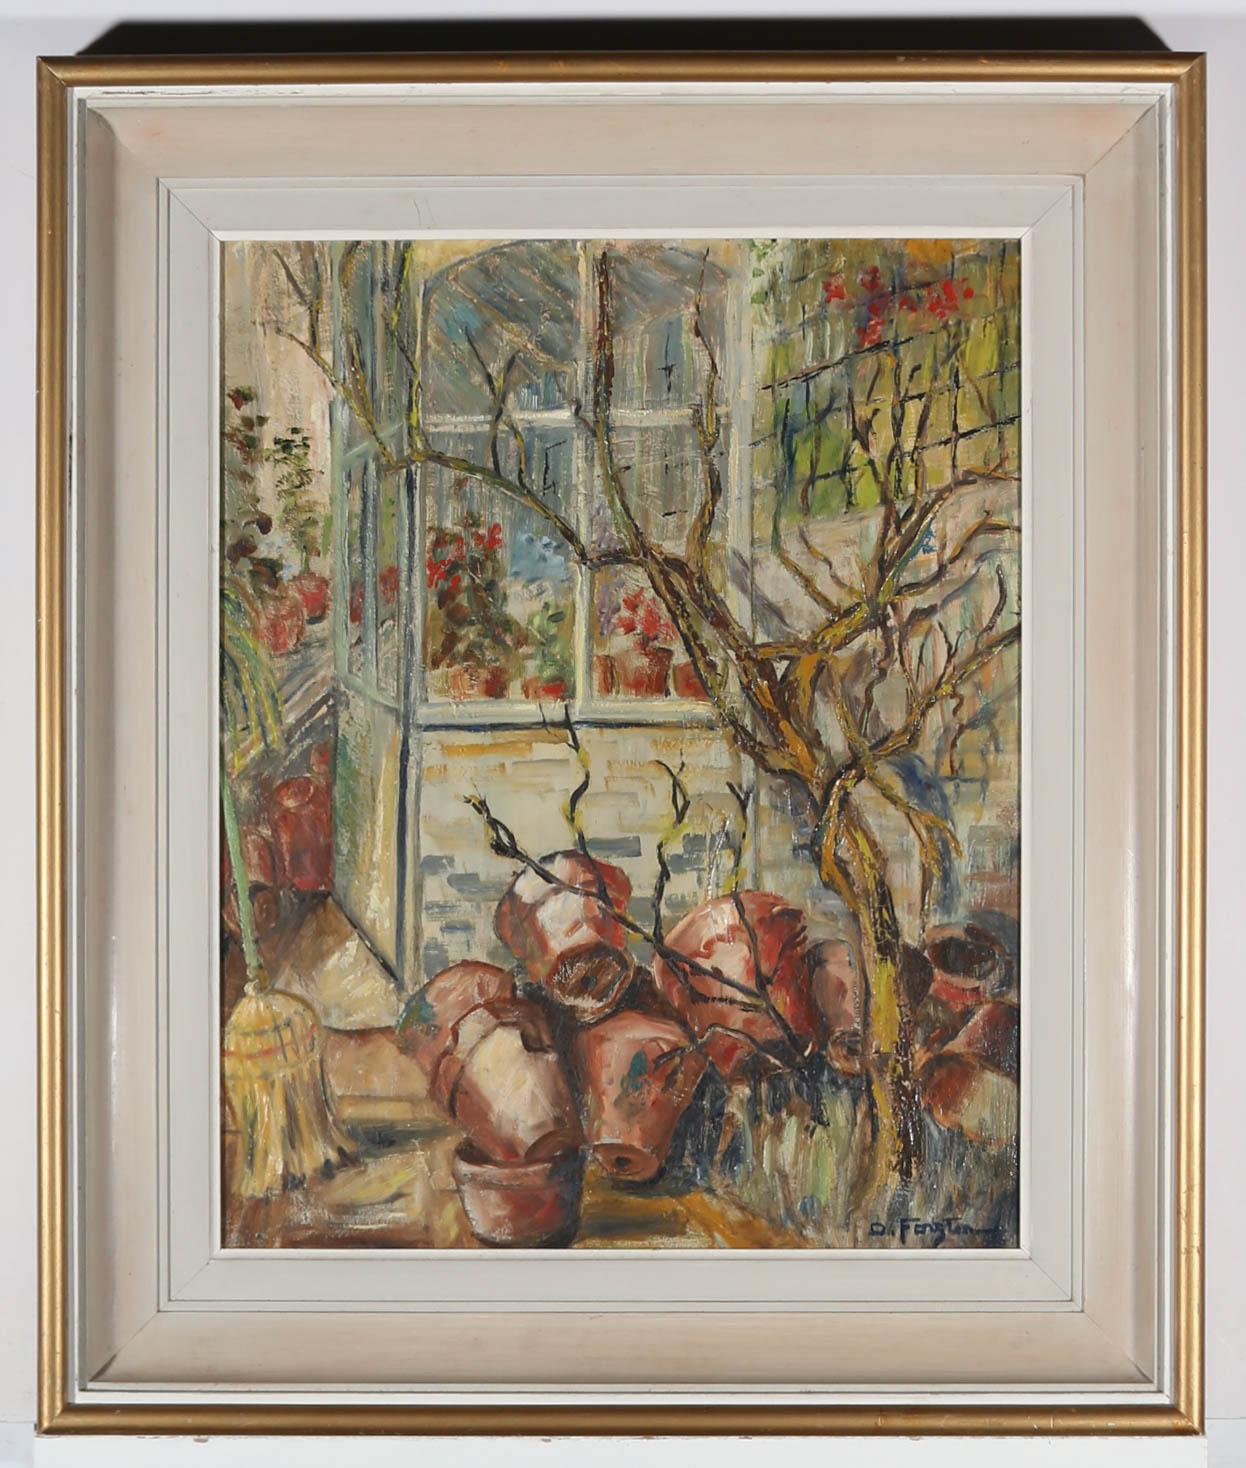 their when you need them! This figurative garden study depicts a pile of terracotta pots waiting to be of use outside a large glass greenhouse. The artist has signed the scene to the lower right corner, and the oil has been well presented in an